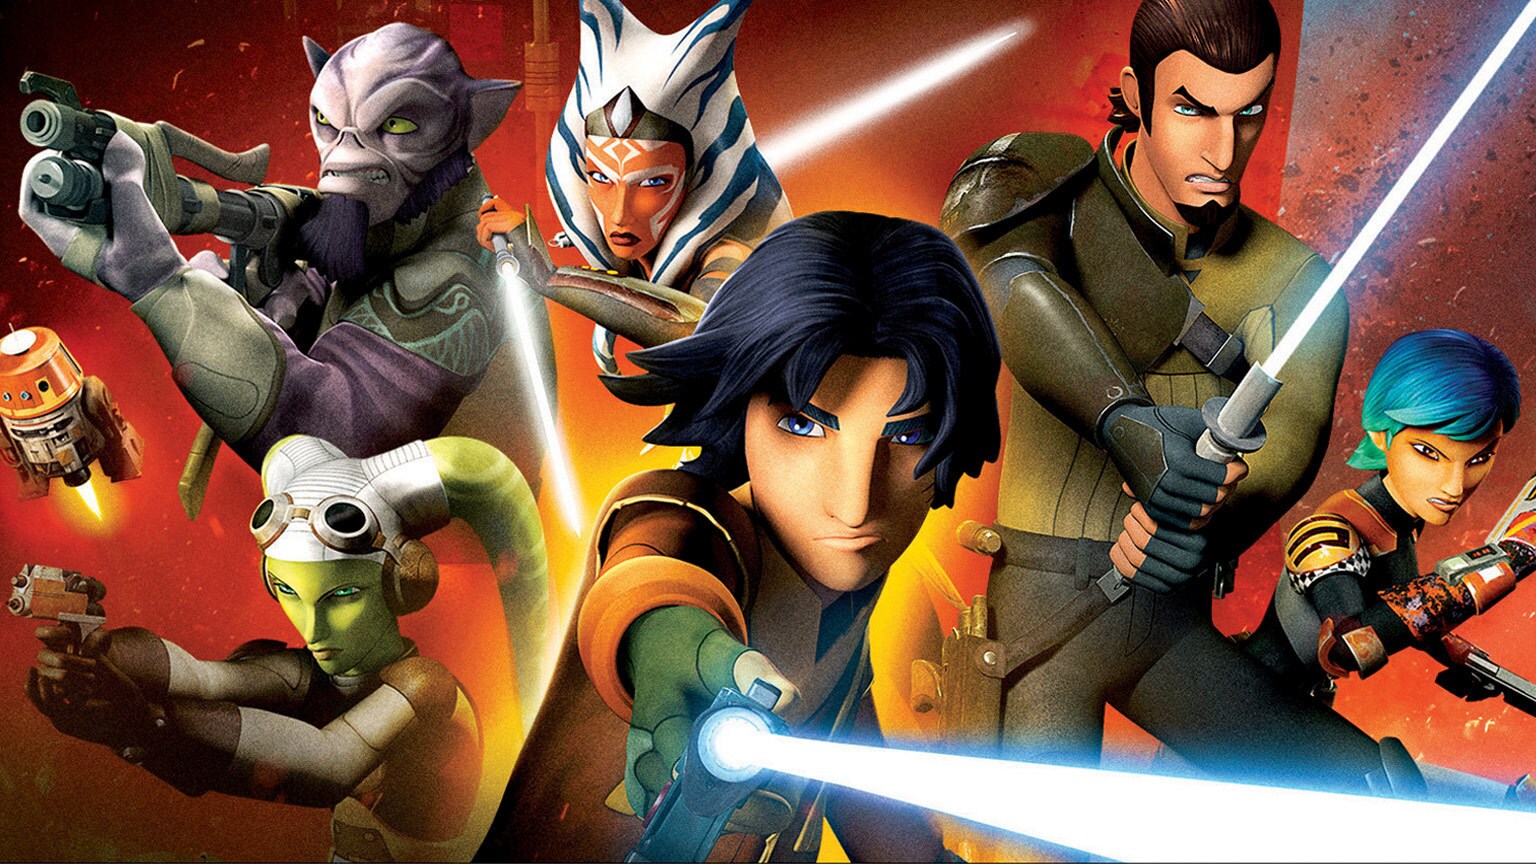 Star Wars Rebels: Complete Season Two Available Now on Blu-ray and DVD